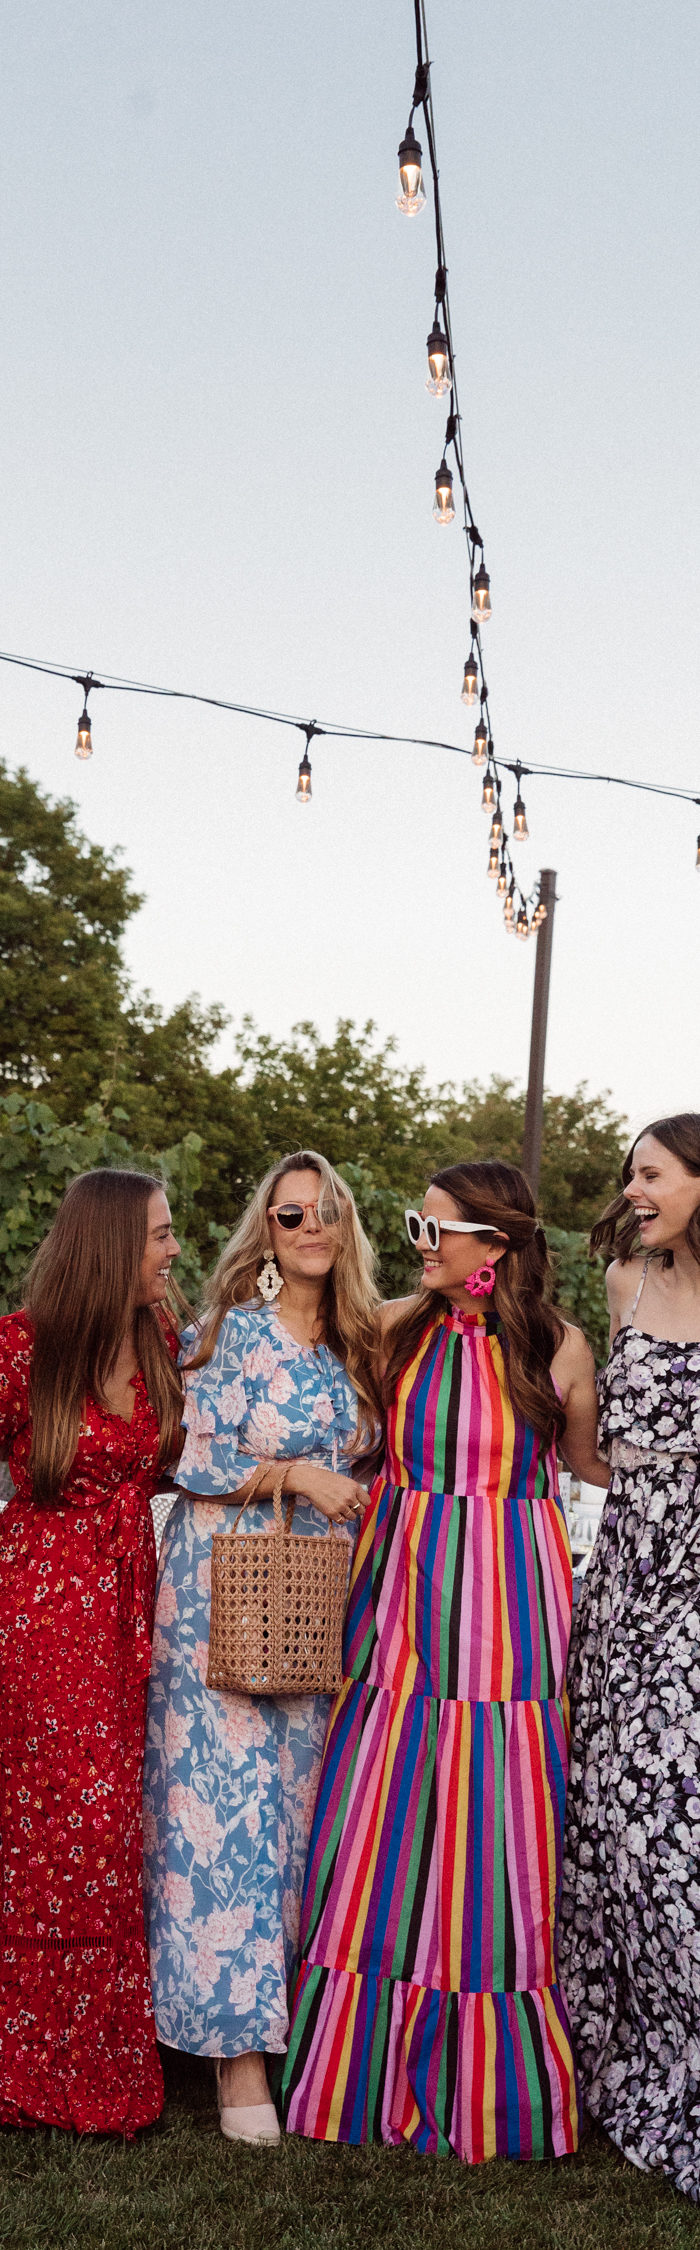 Alyssa Campanella of The A List blog enjoys a wine and design visit with Serena & Lily and Visit Napa Valley